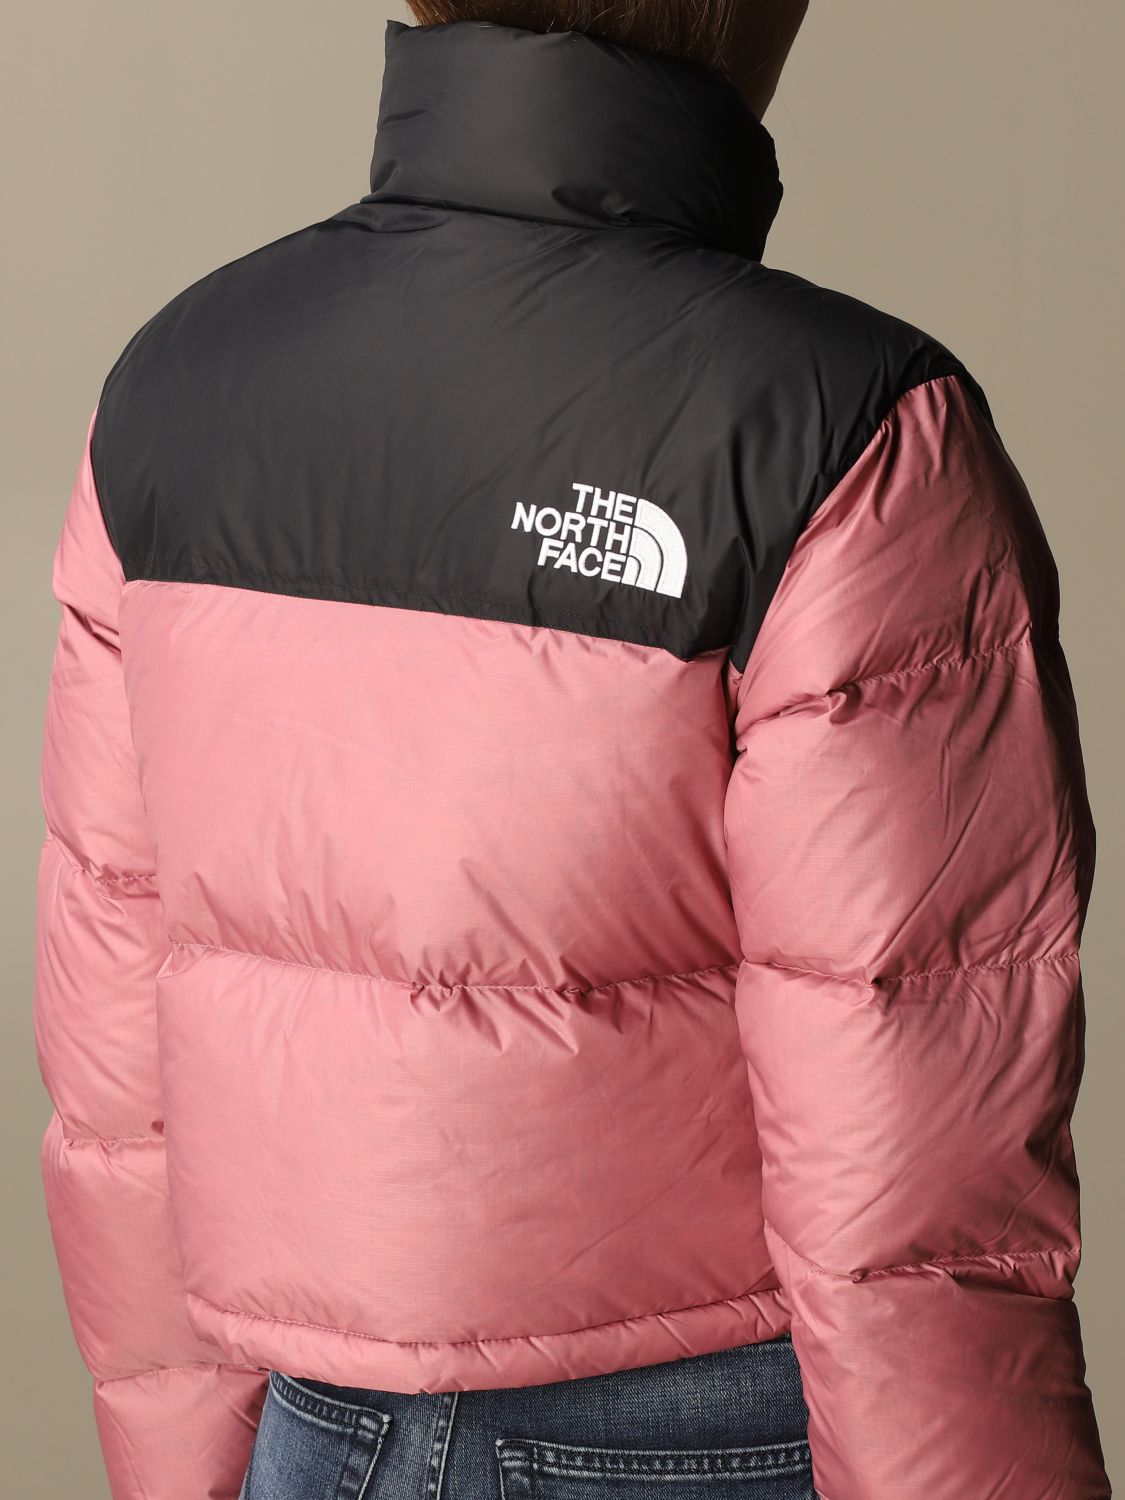 The North Face Jacket Women Jacket The North Face Women Pink Jacket The North Face Nf0a3xe2 Giglio Uk